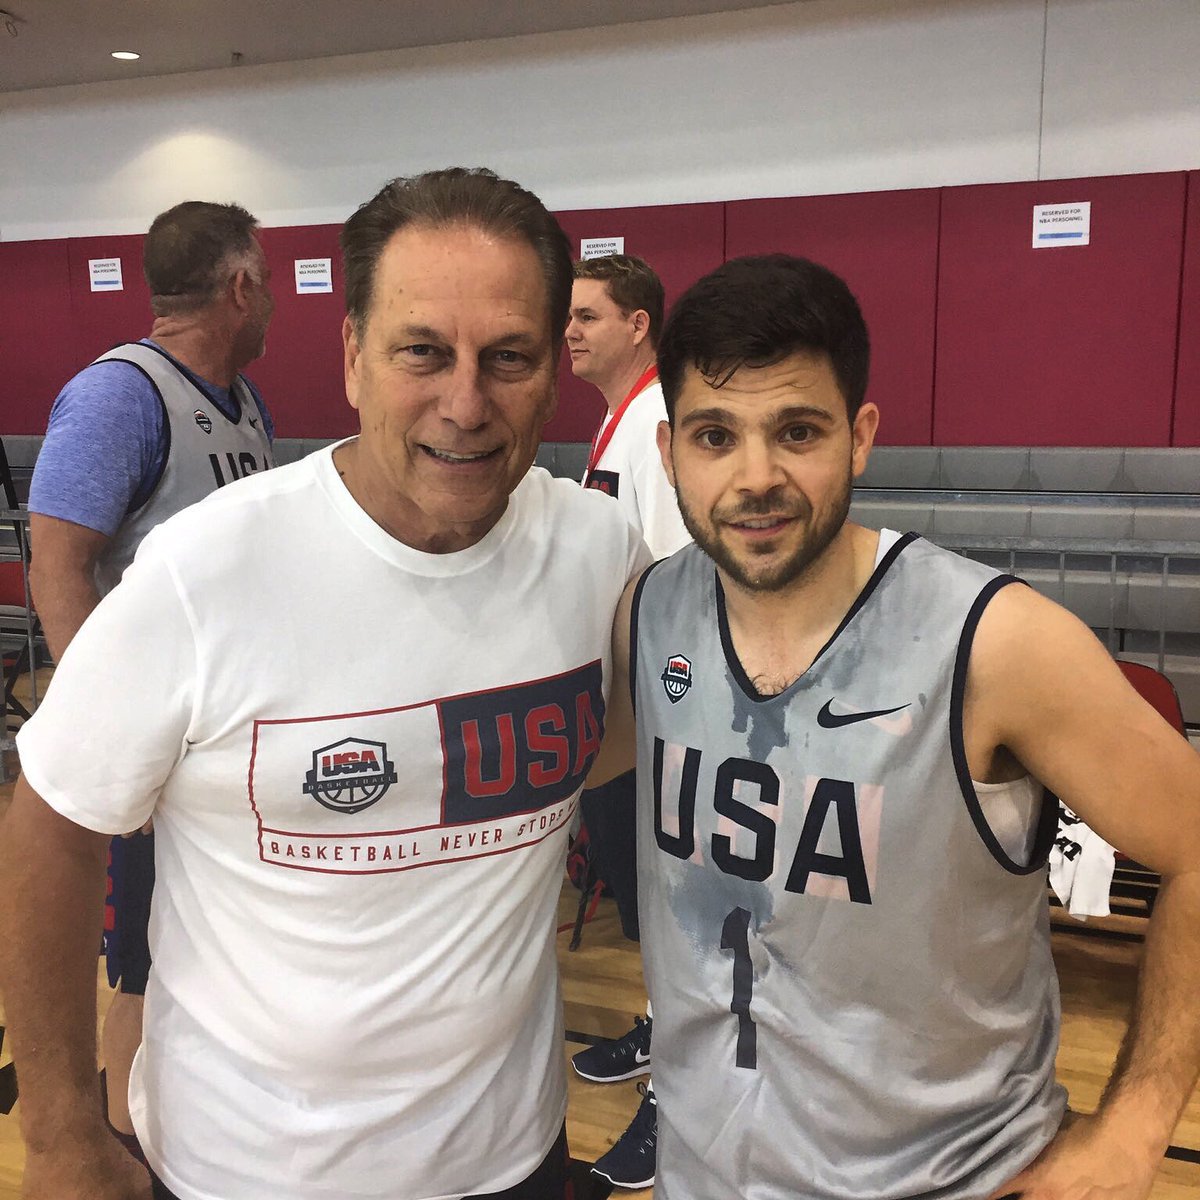 #USABMNT fantasy camp isnt going well for my team. Even though his team crushed mine loved meeting Coach Izzo https://t.co/UJ8w1xaypn